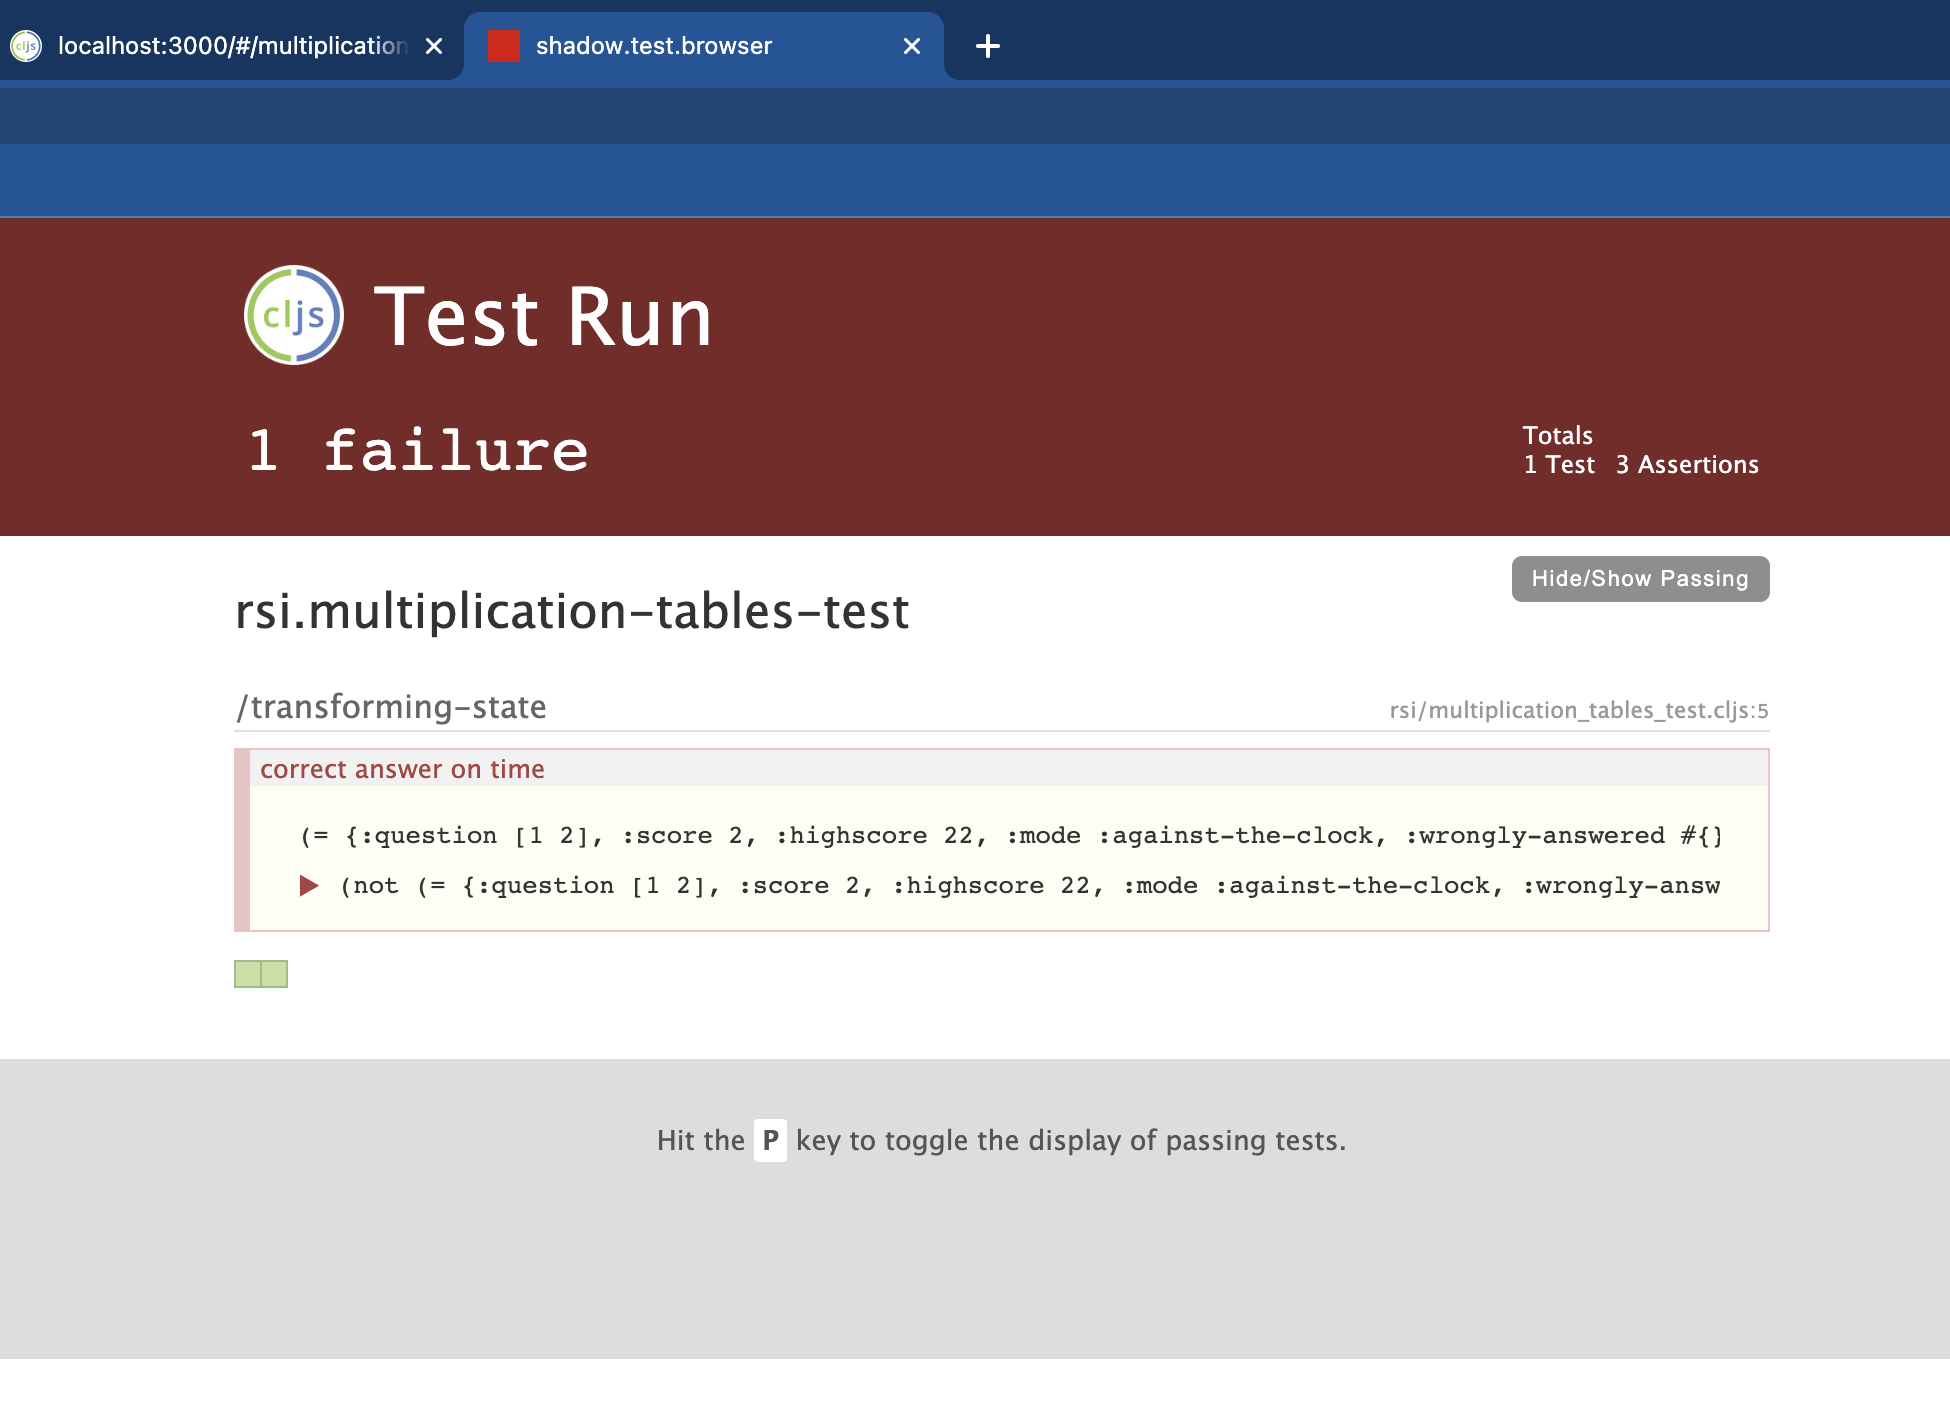 One tests fails